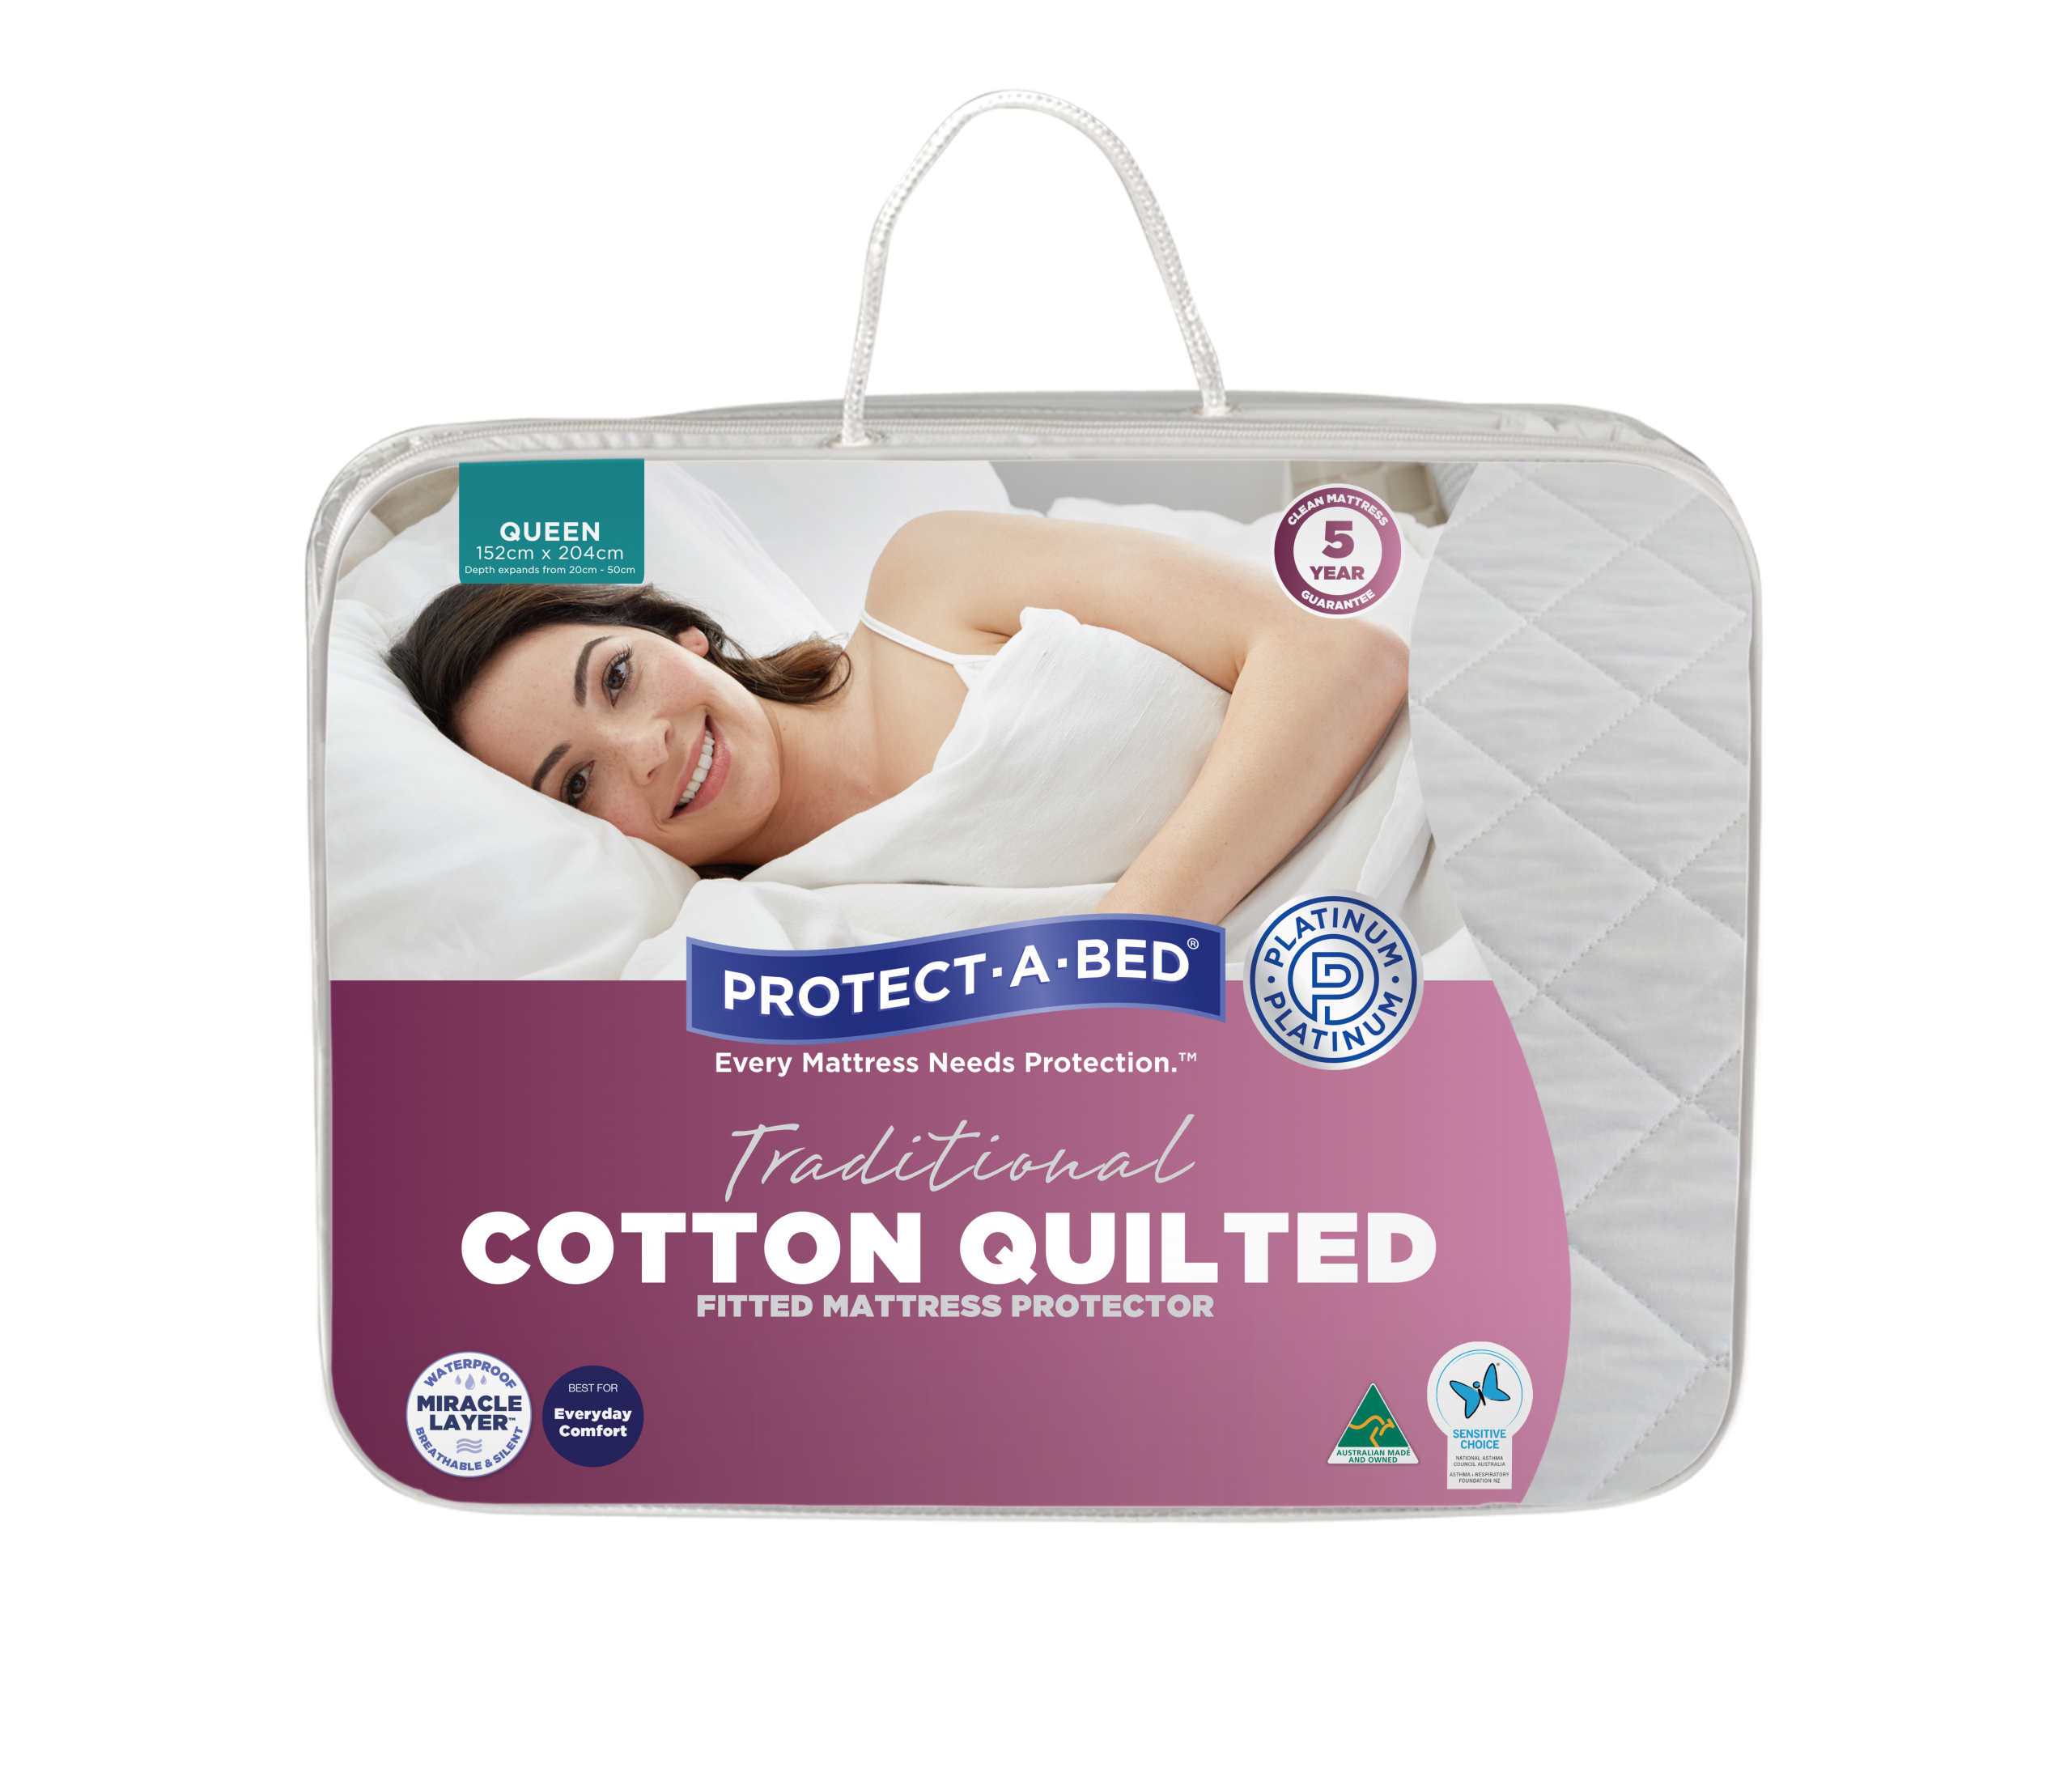 Cotton Quilted Fitted Mattress Protector